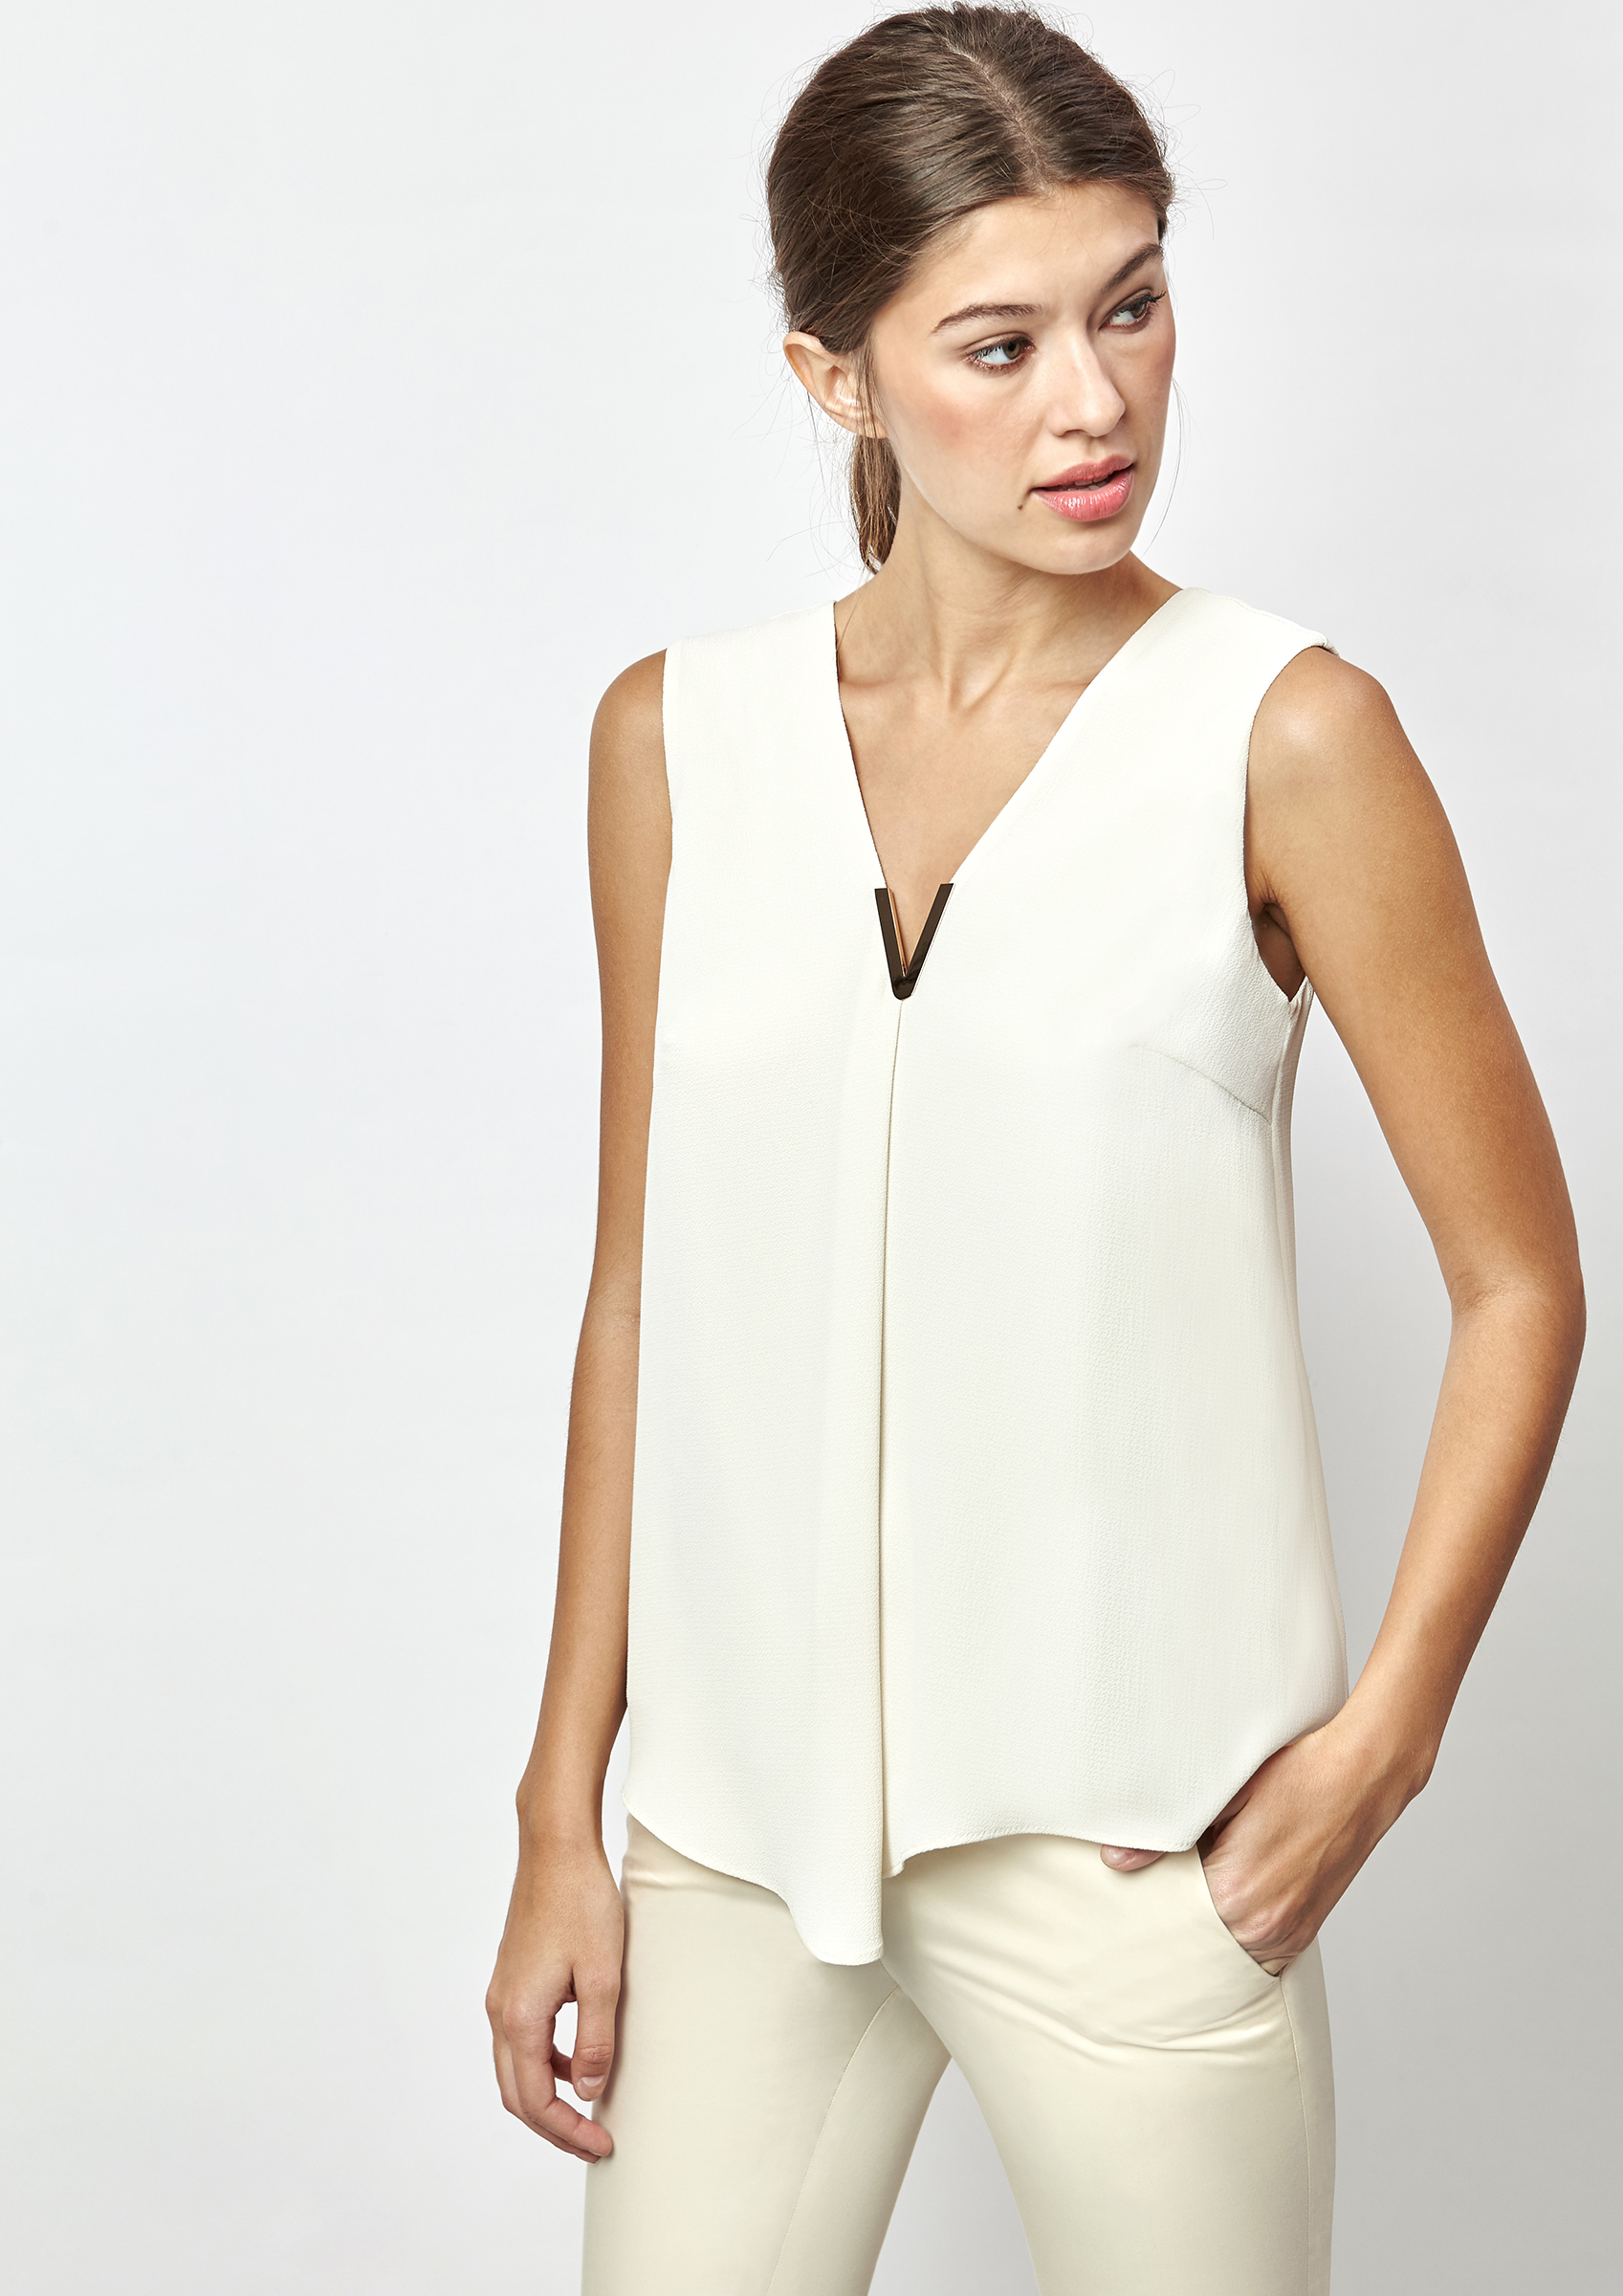 Ecru blouse with low back